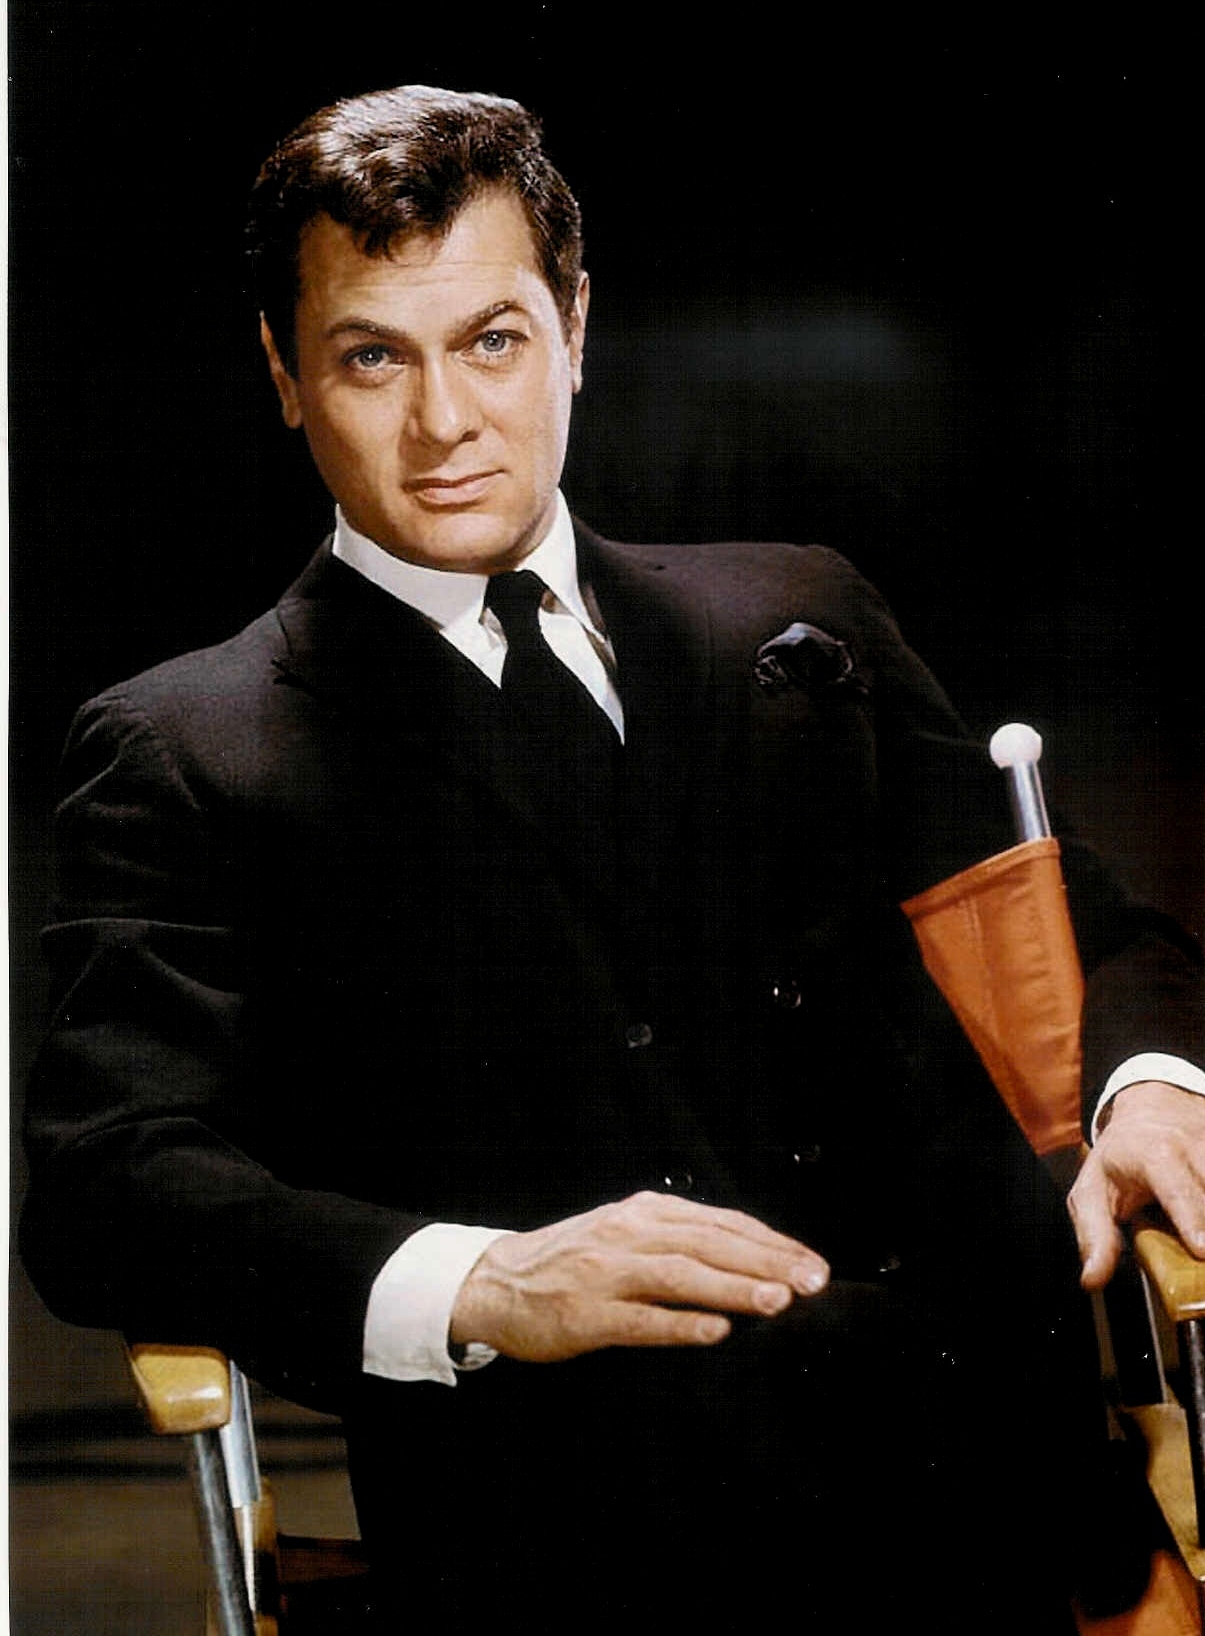 photographic image of Tony Curtis for sale on his website at 